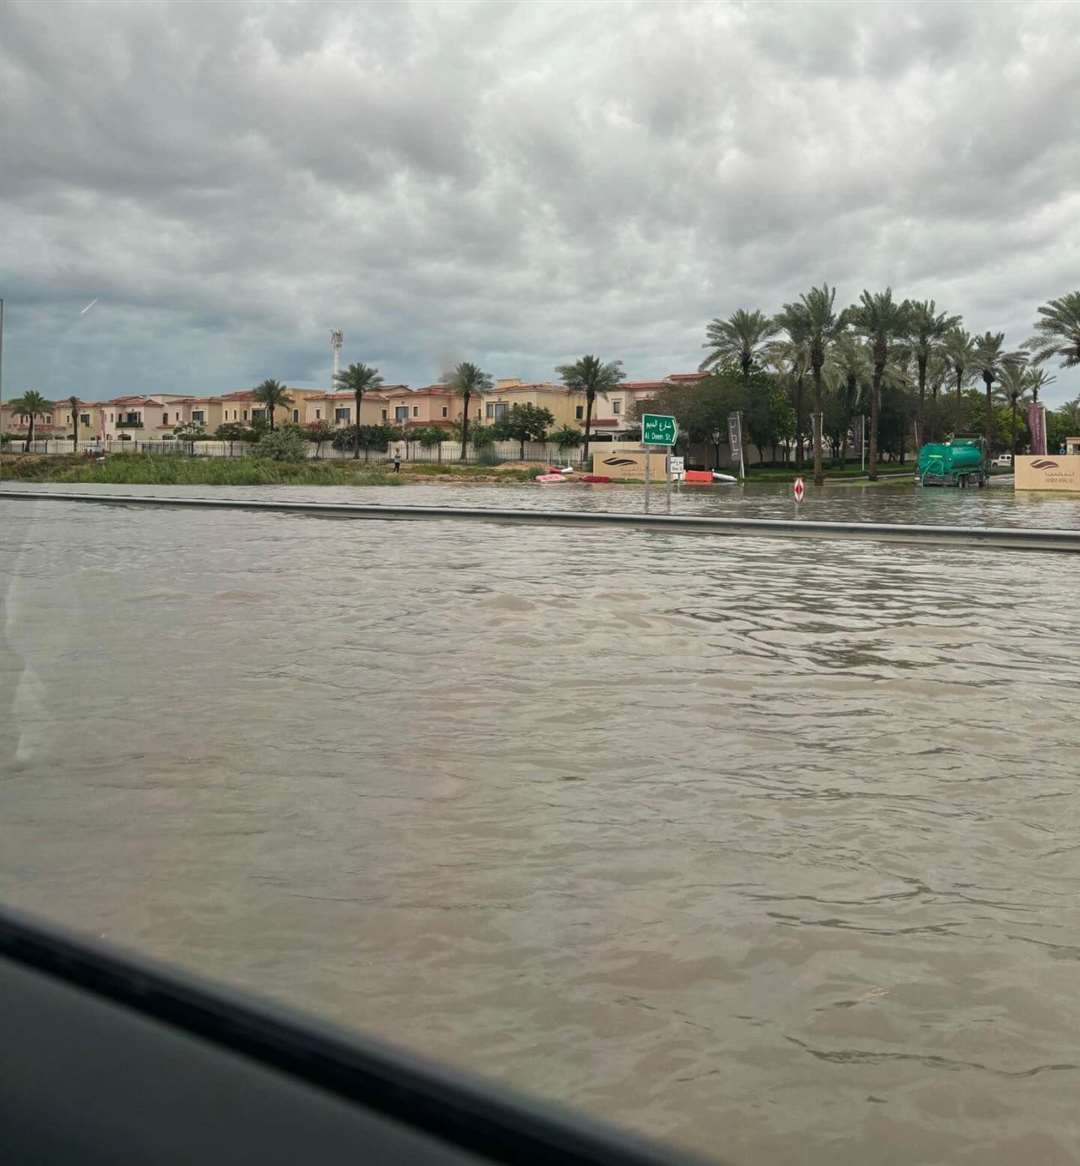 Dubai roads and some cars have been submerged in the floods